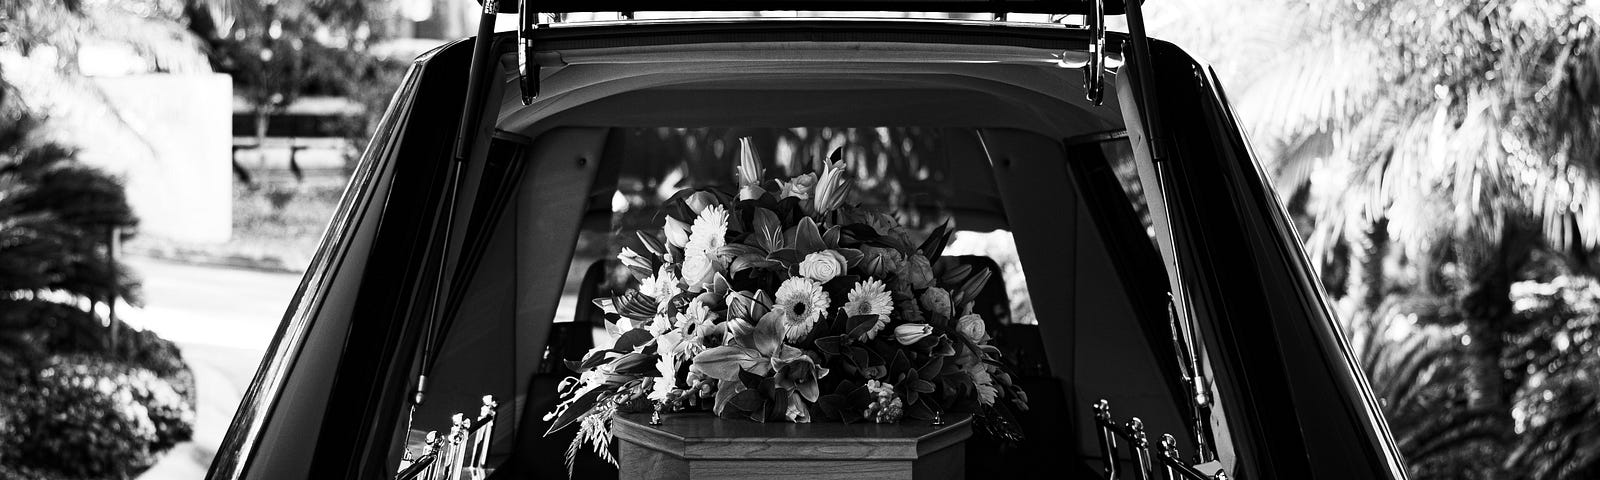 Coffin with flowers inside hearse